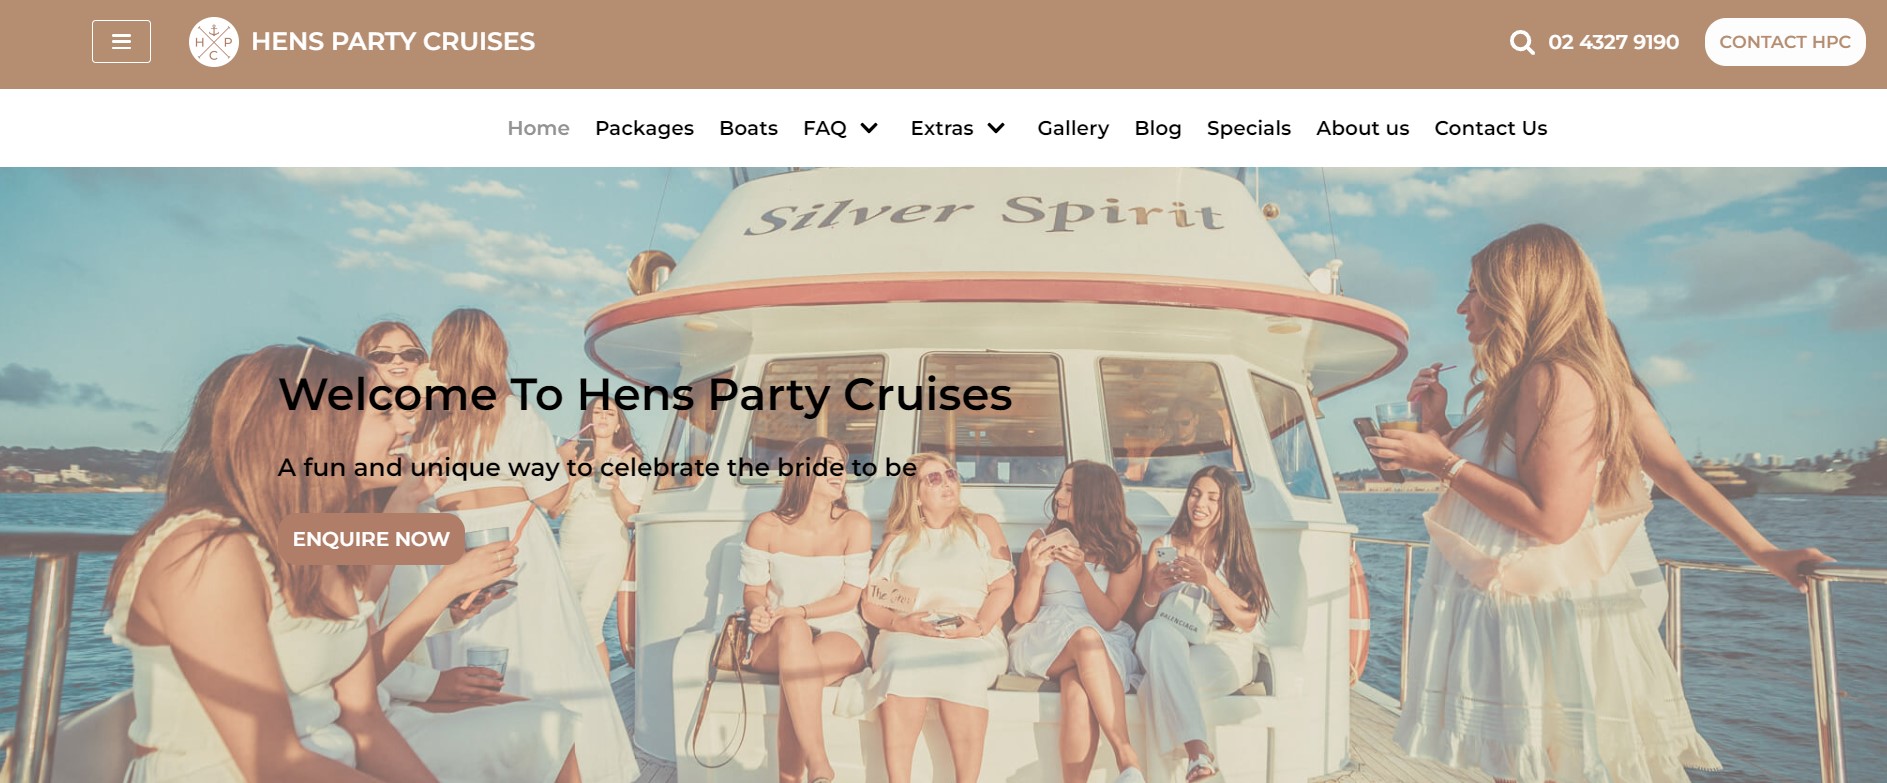 hens party cruises hens party ideas sydney